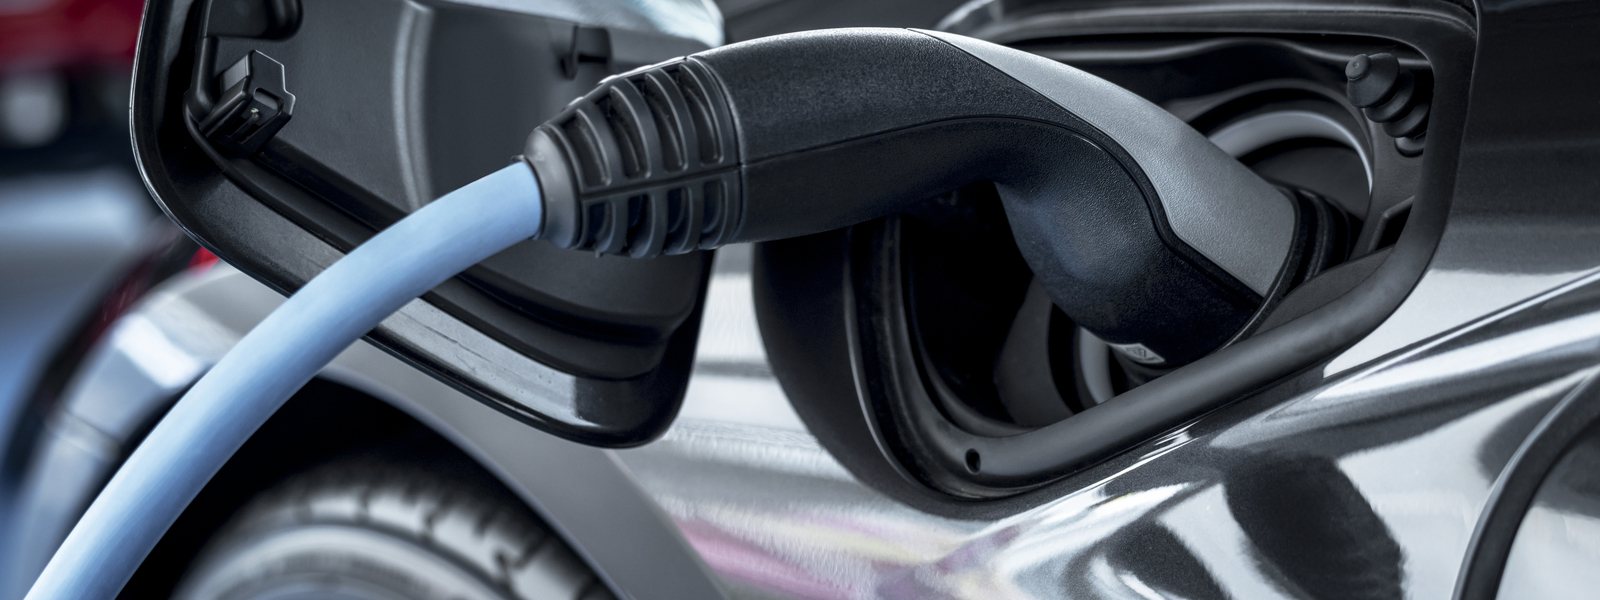 Should I get a fully electric car or hybrid? Pros and cons of each.